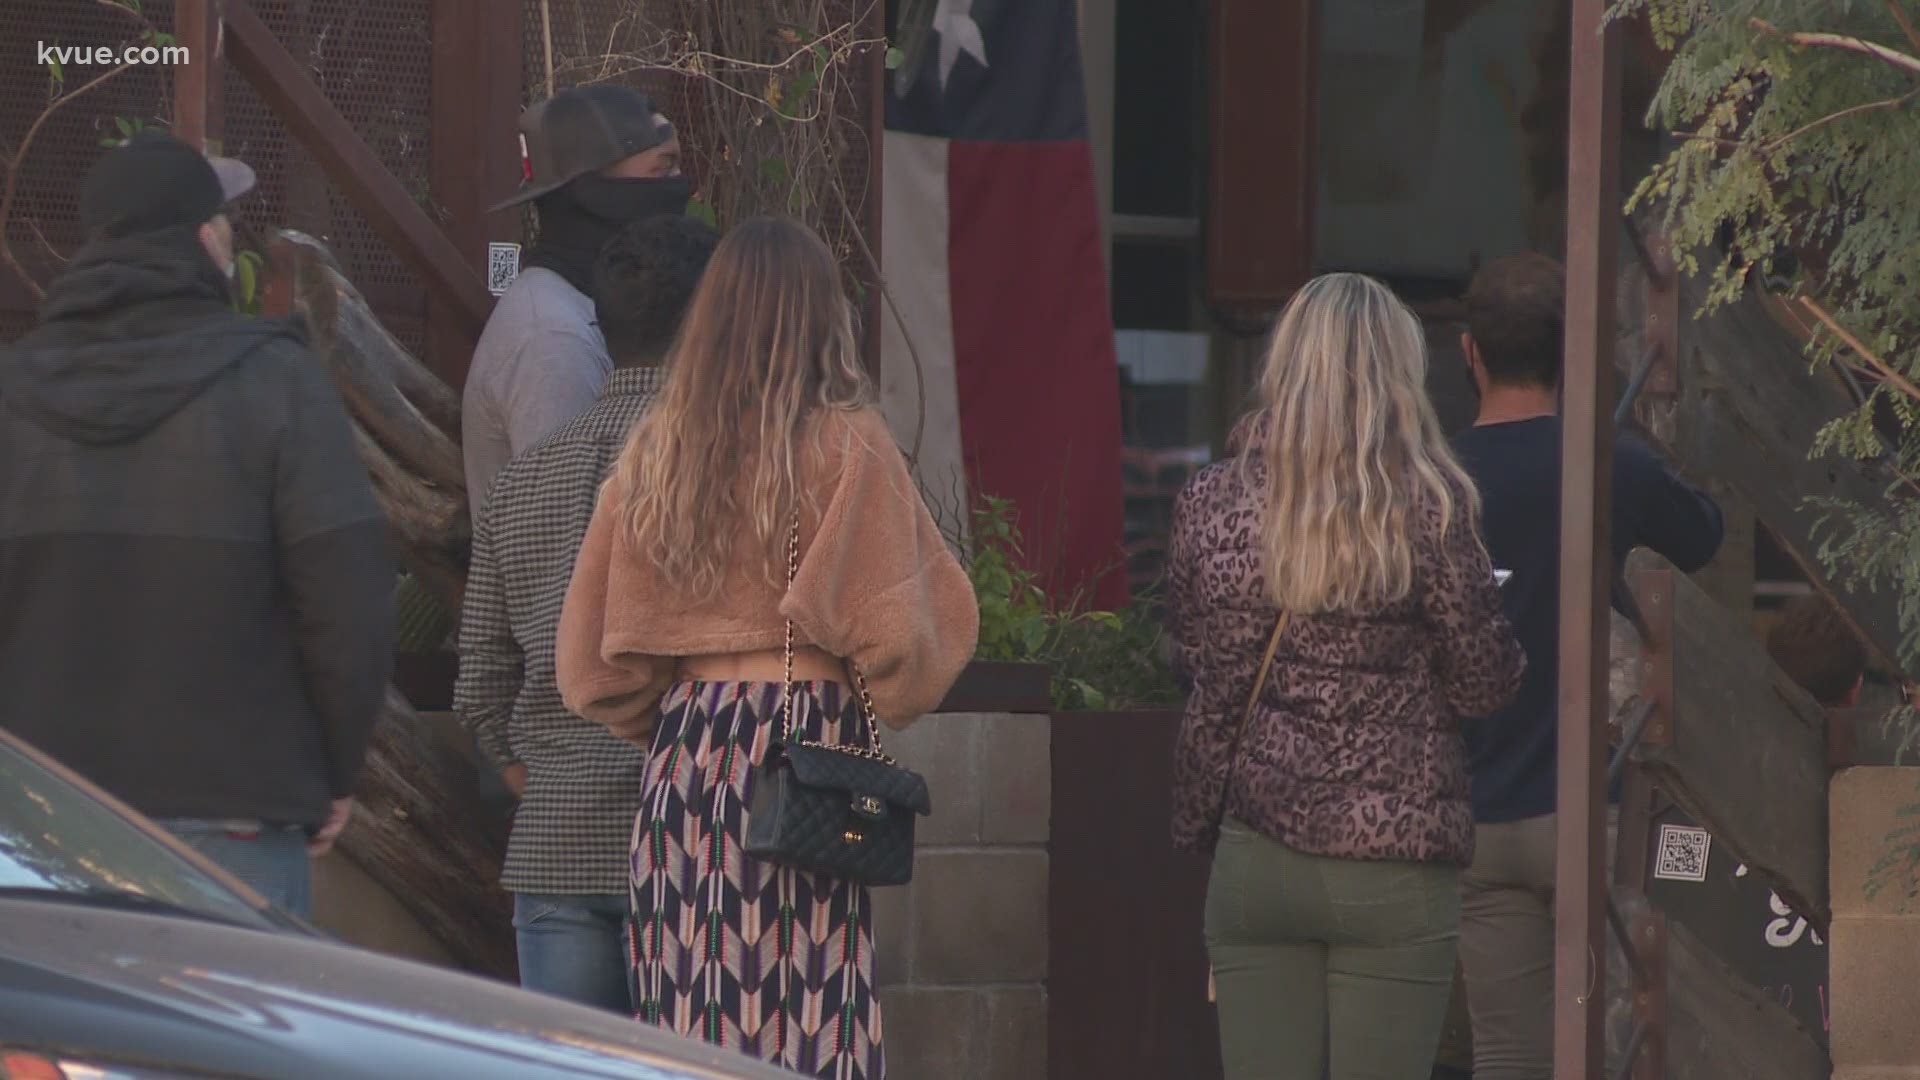 Despite numerous warnings from health officials, Austinites were out at bars in Downtown Austin.